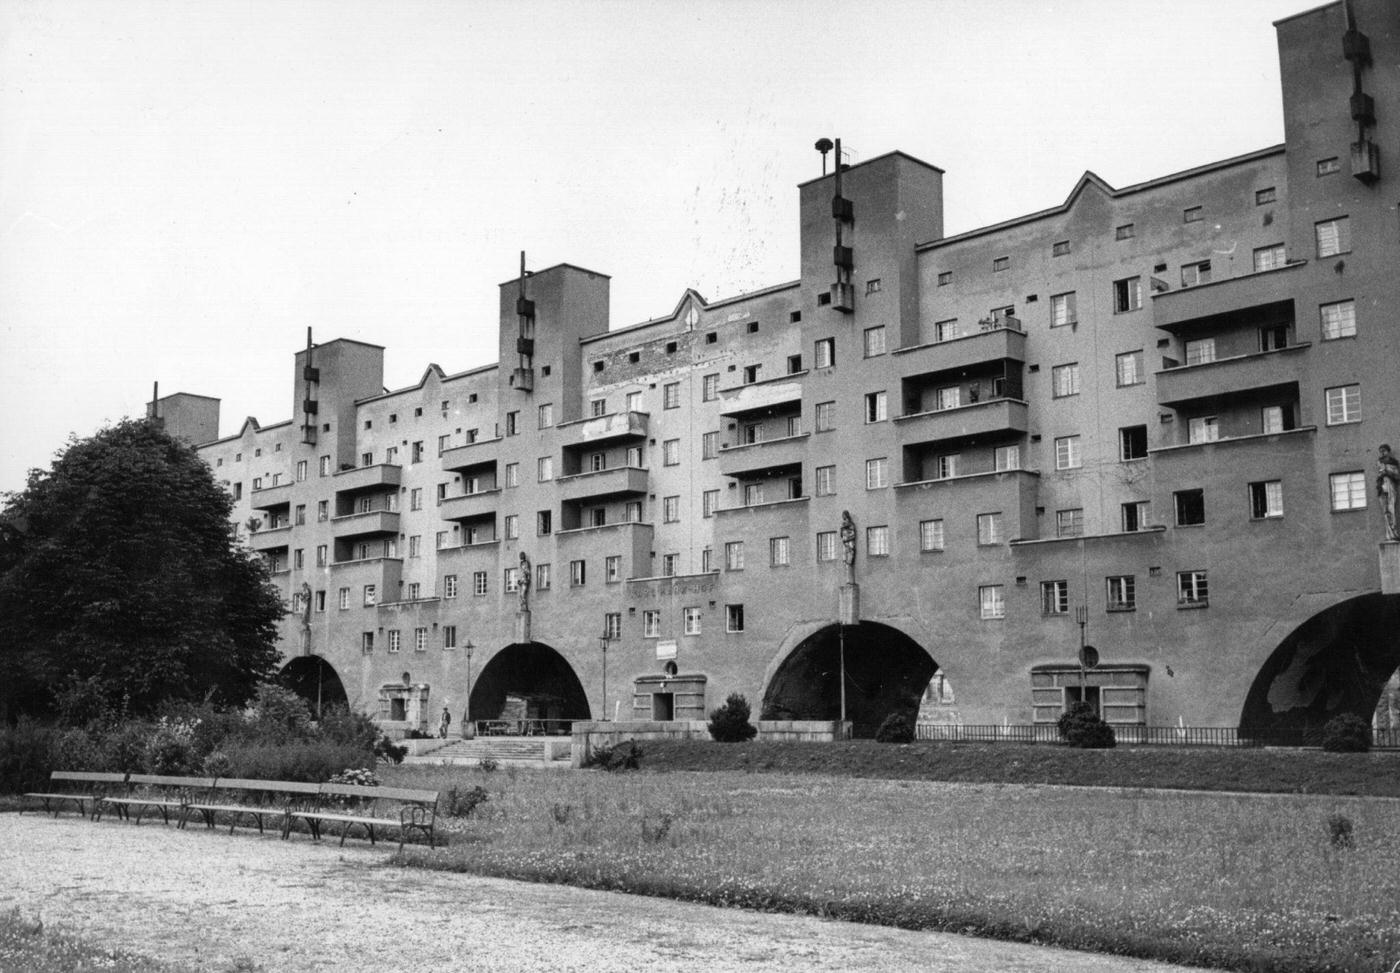 Workers' flats at Heiligenstadt in Vienna, built by the socialist government in 1930, photographed in July 1954.